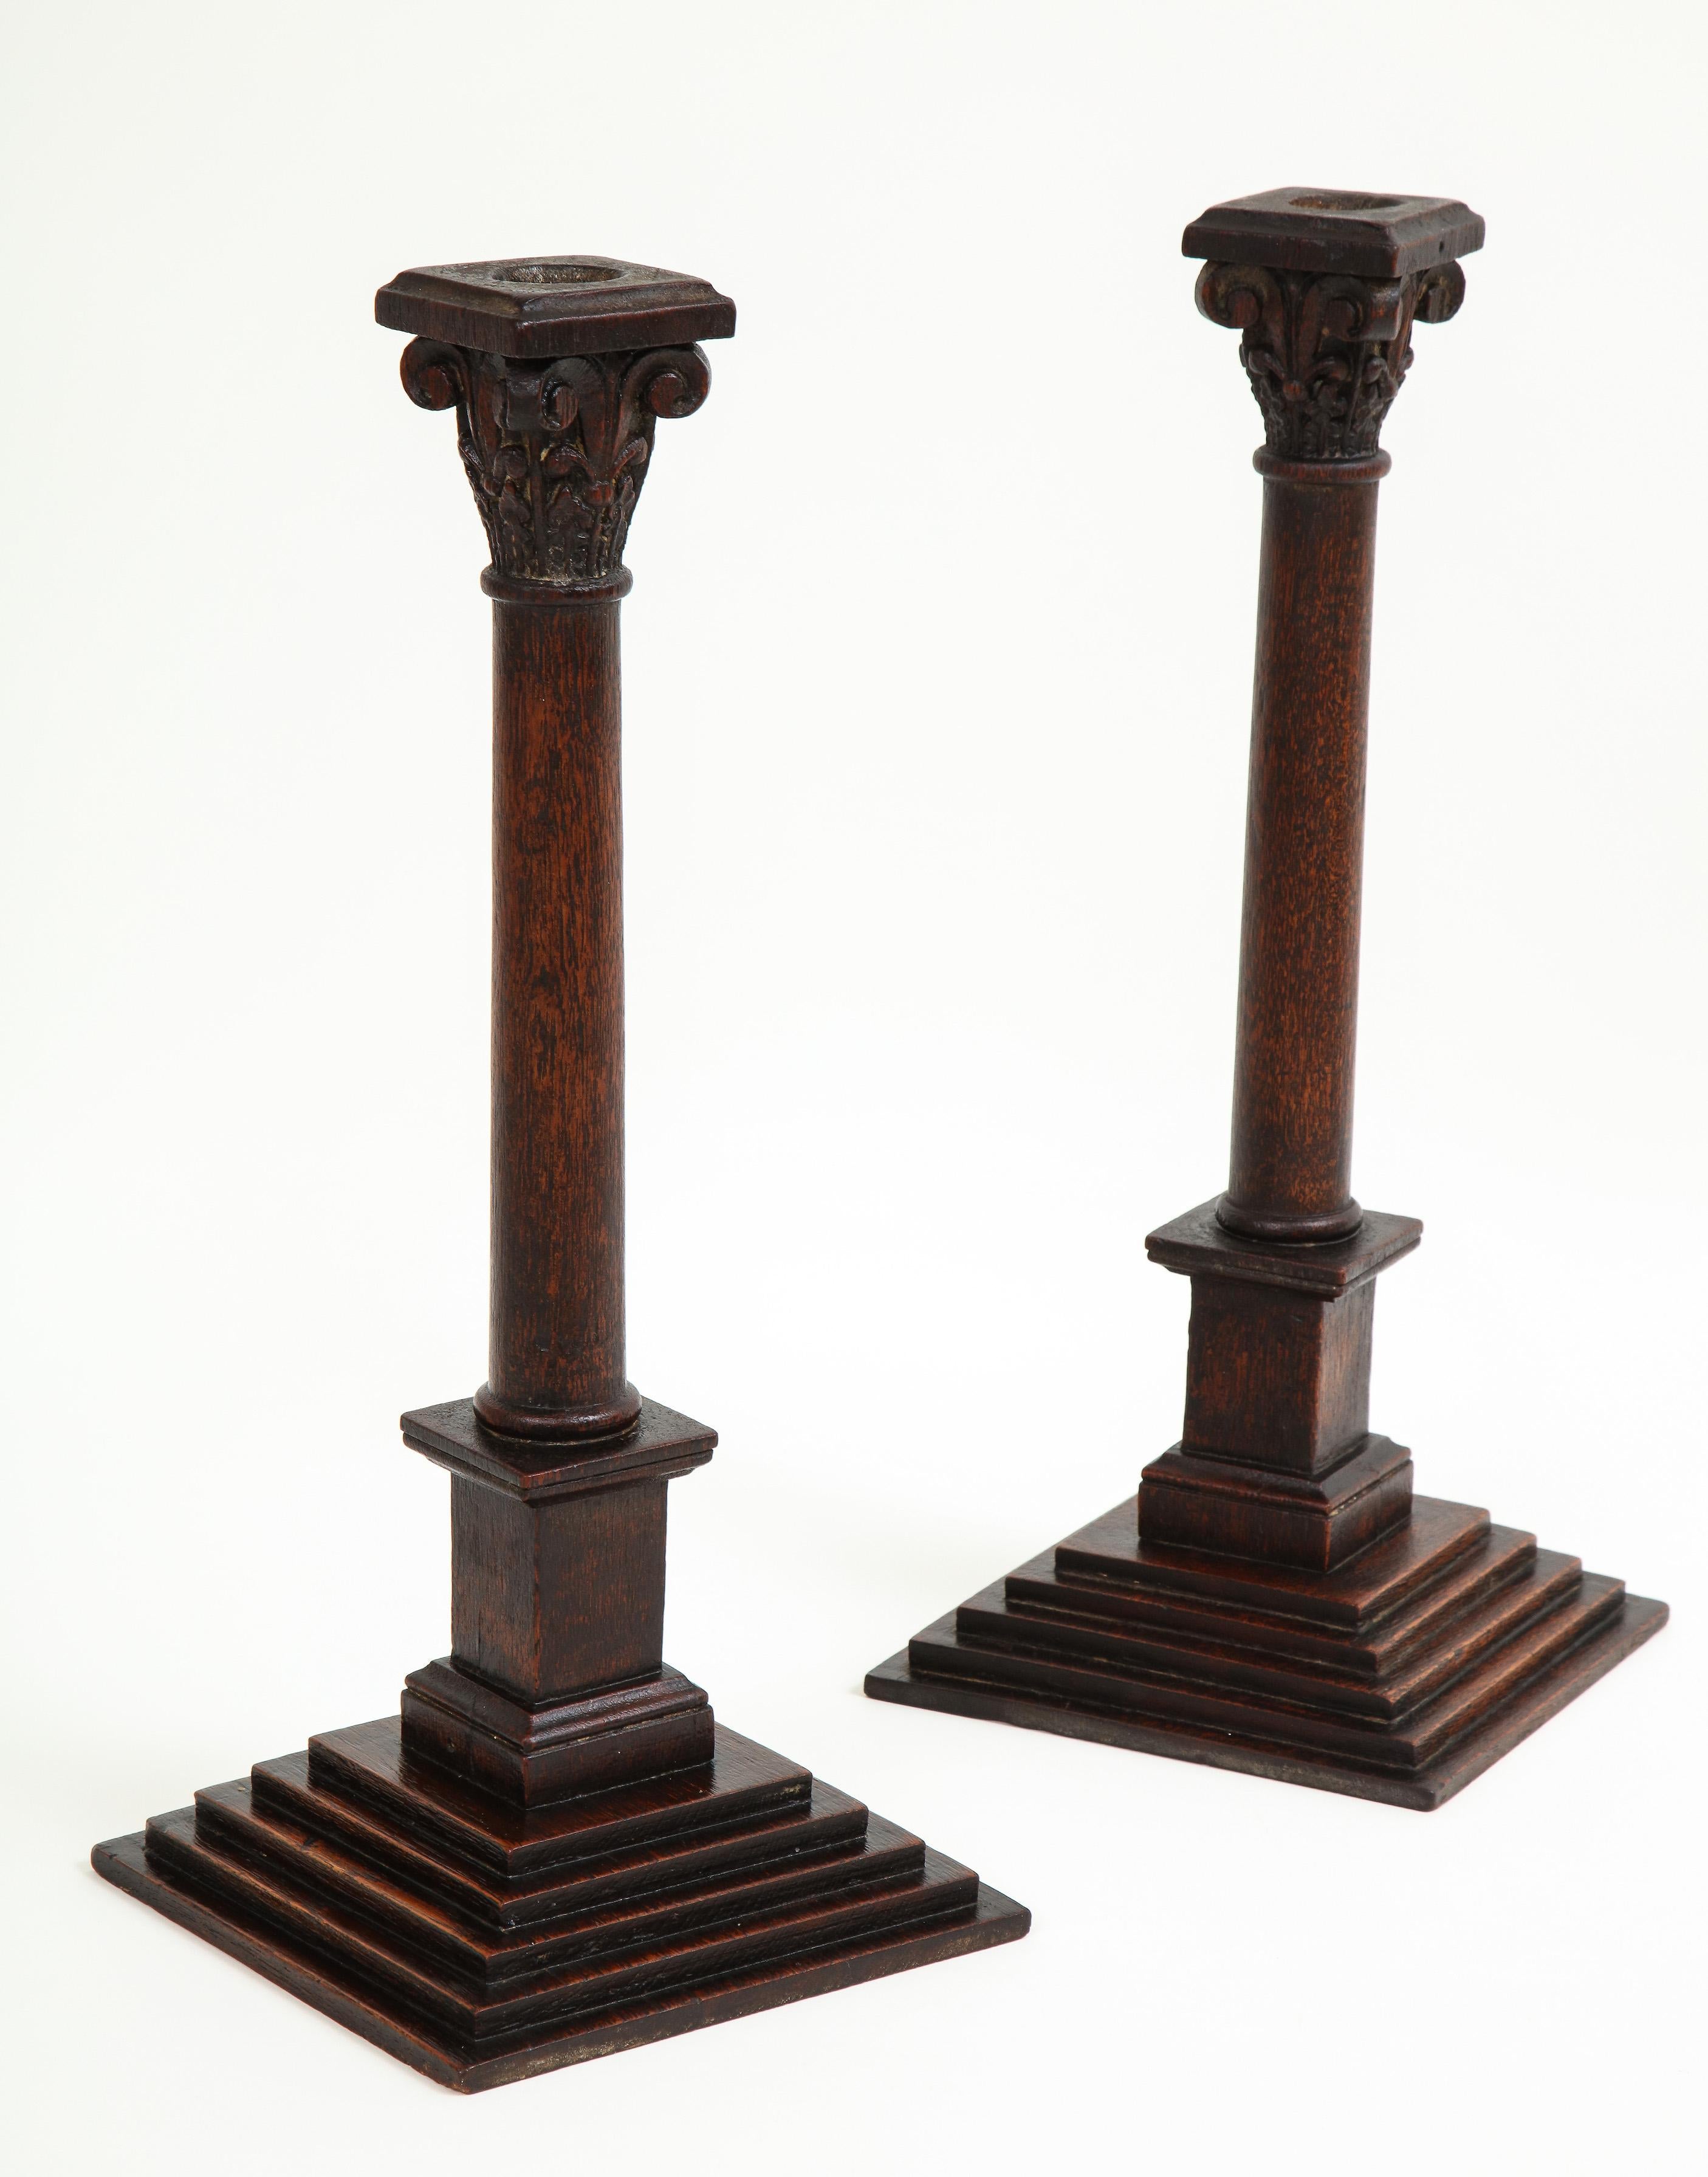 Each with deep brown patinated surface and in the form of a column from the composite order which combines the volutes of the ionic order with the foliate capital of the Corinthian; on a stepped plinth base. Beautifully carved.